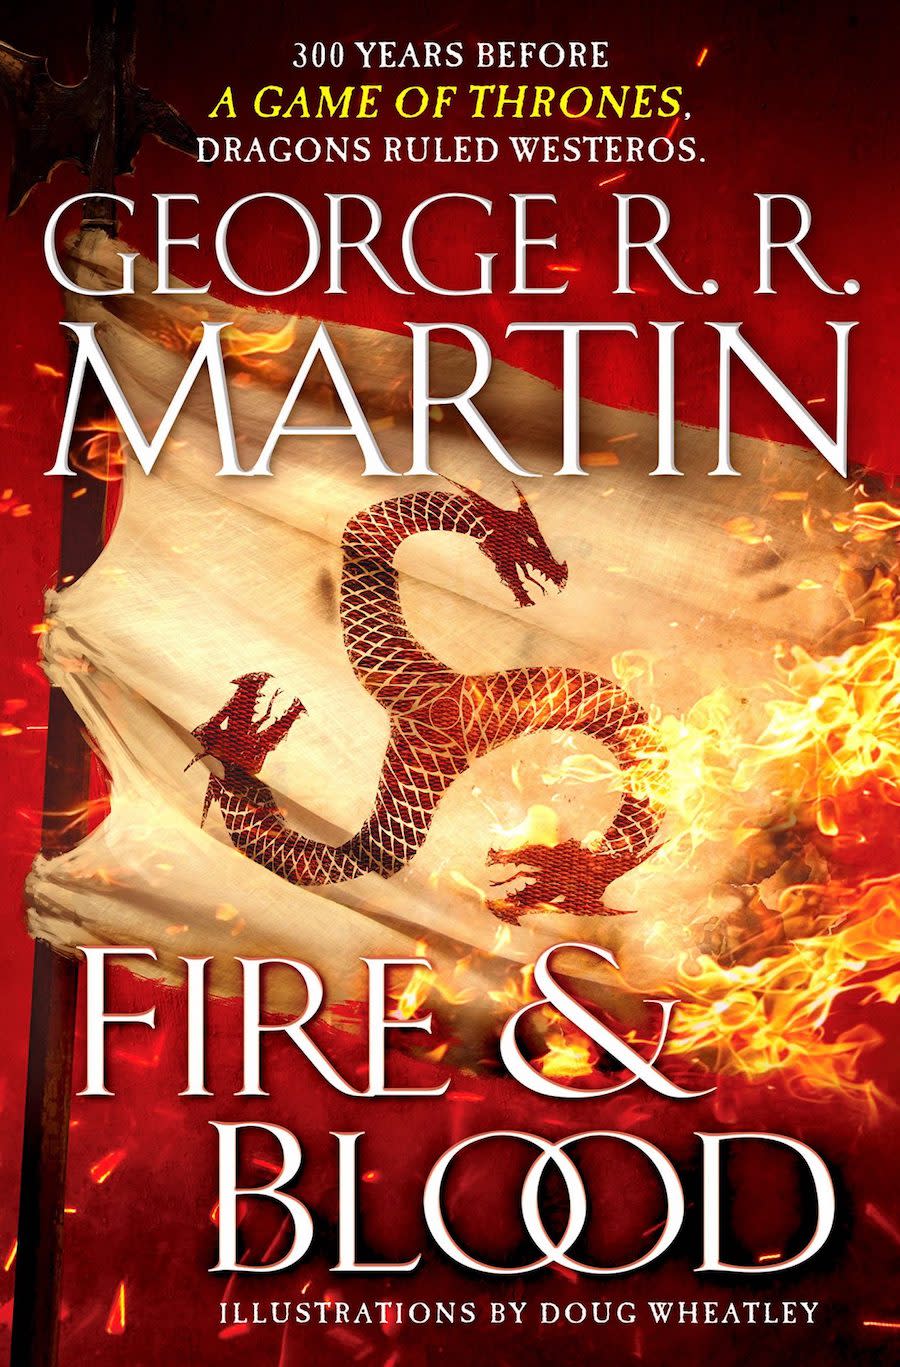 A three-headed dragon on a burning flag on the cover of George R.R. Martin's Fire & Blood